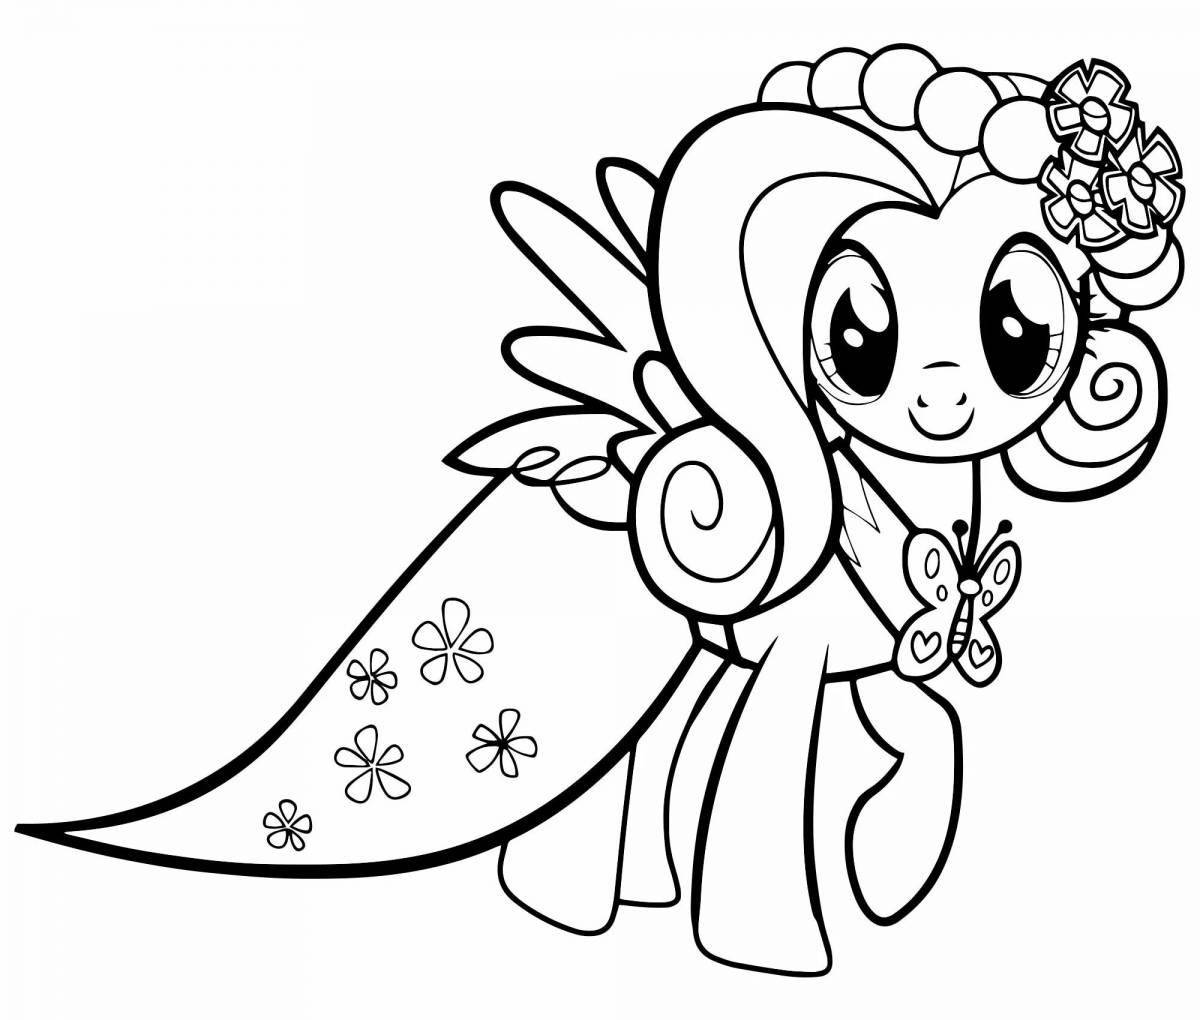 Incredible little pony coloring book for kids